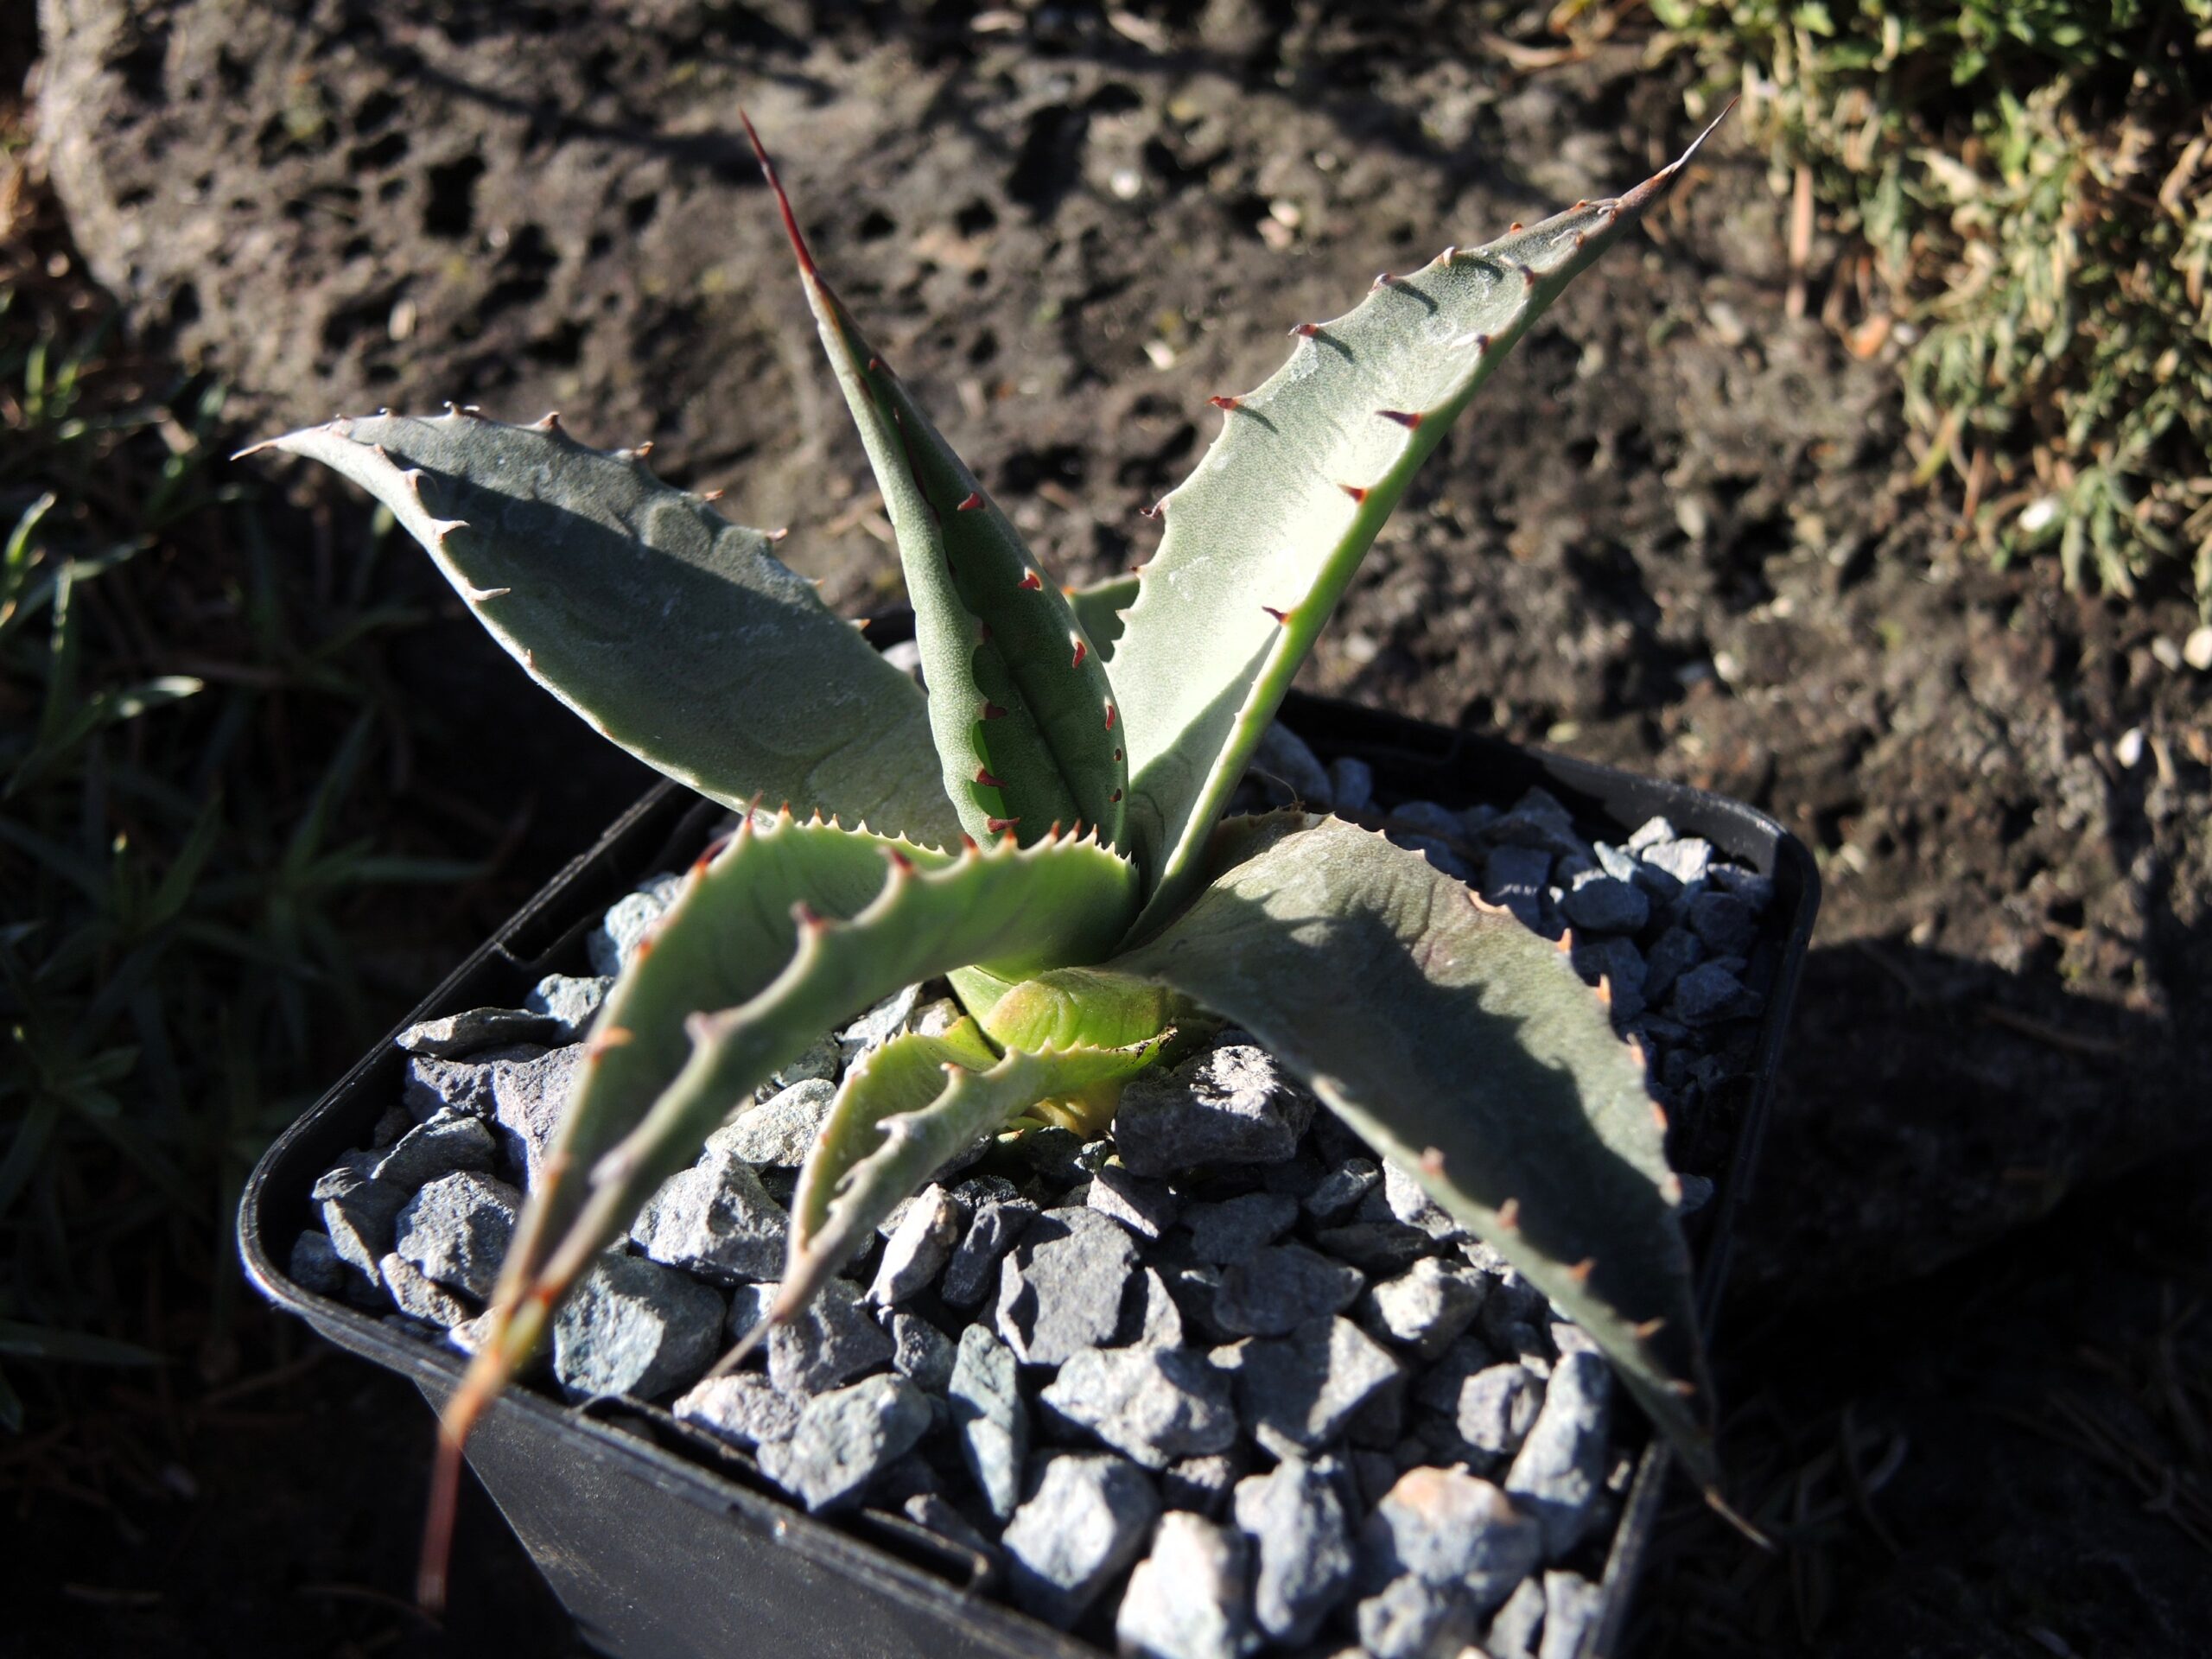 Agave parryi ssp. neomexicana